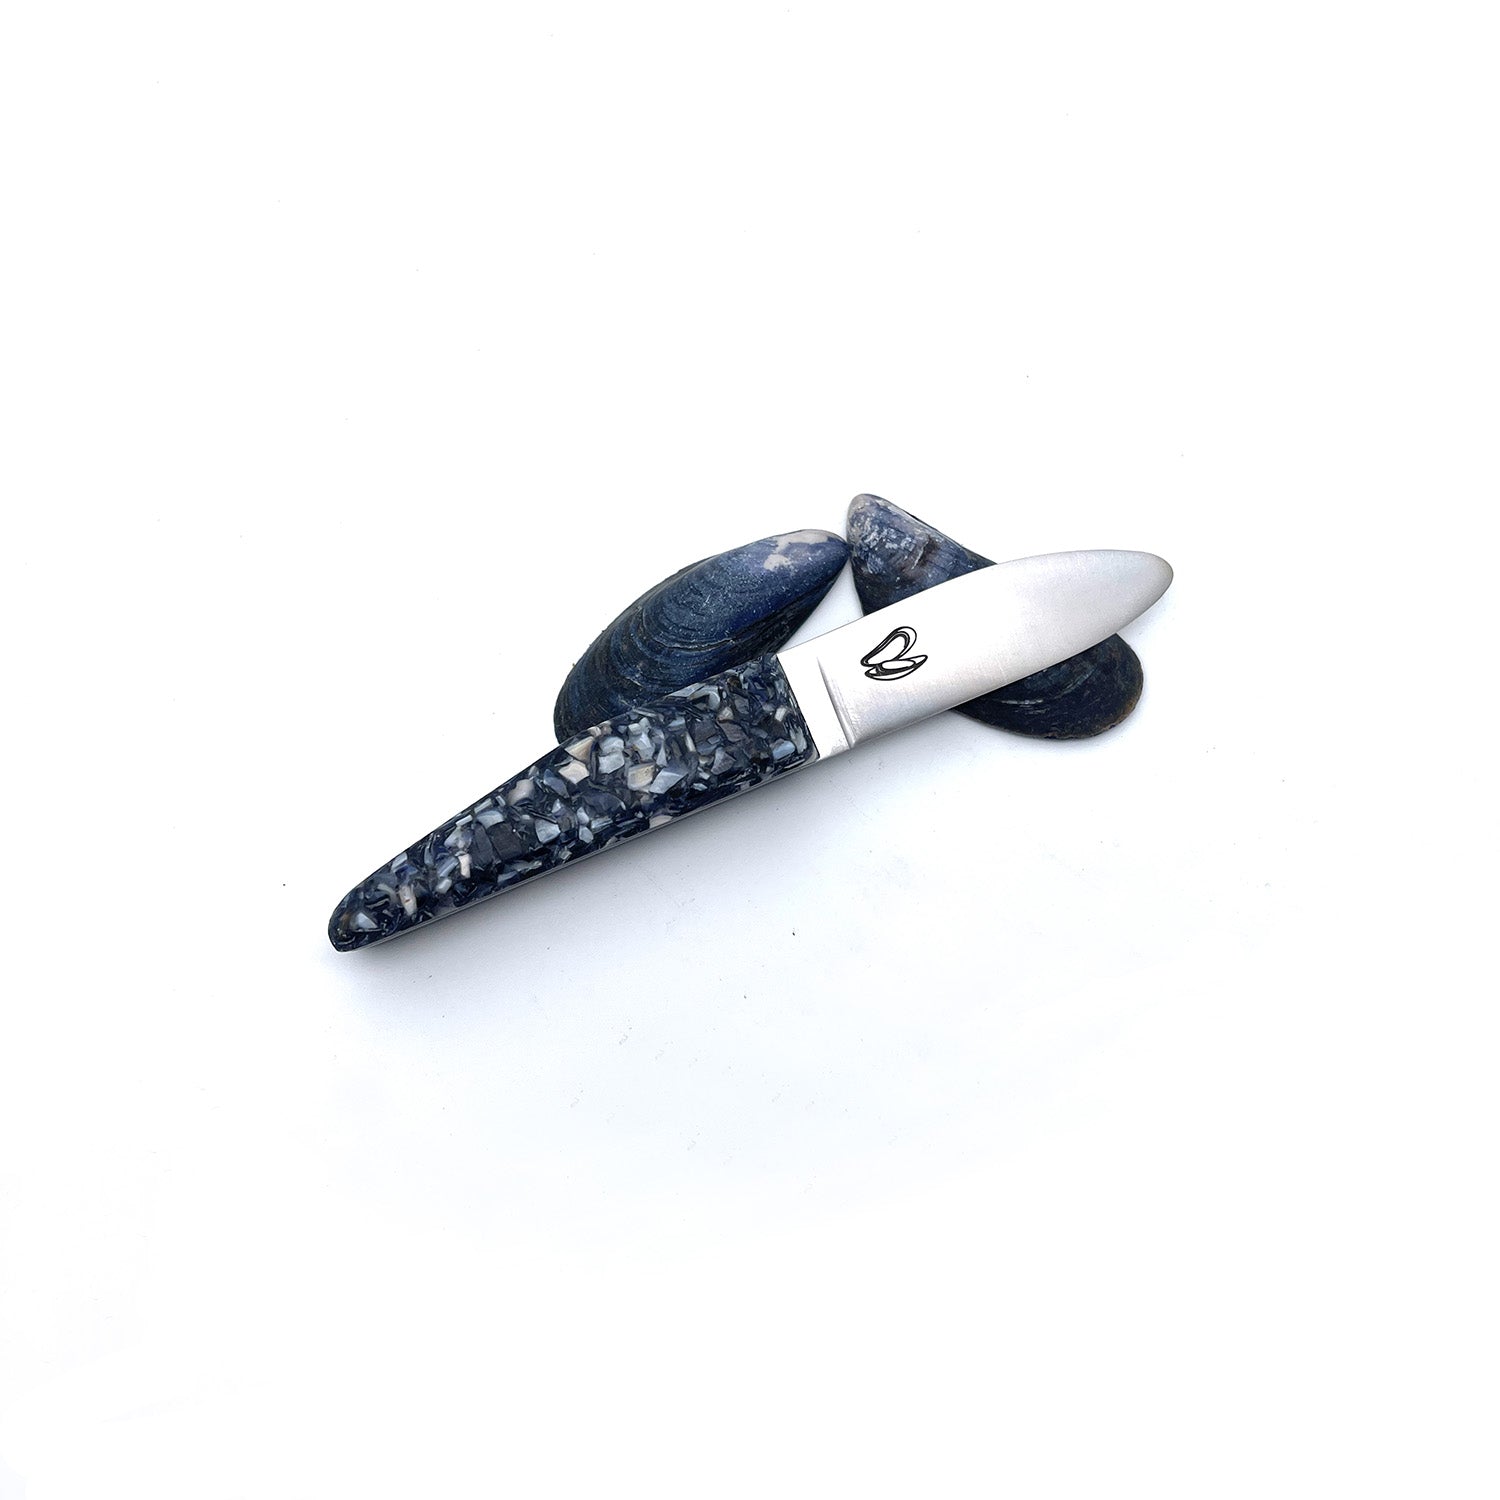 Children's knife with a handle made from recycled mussel shells